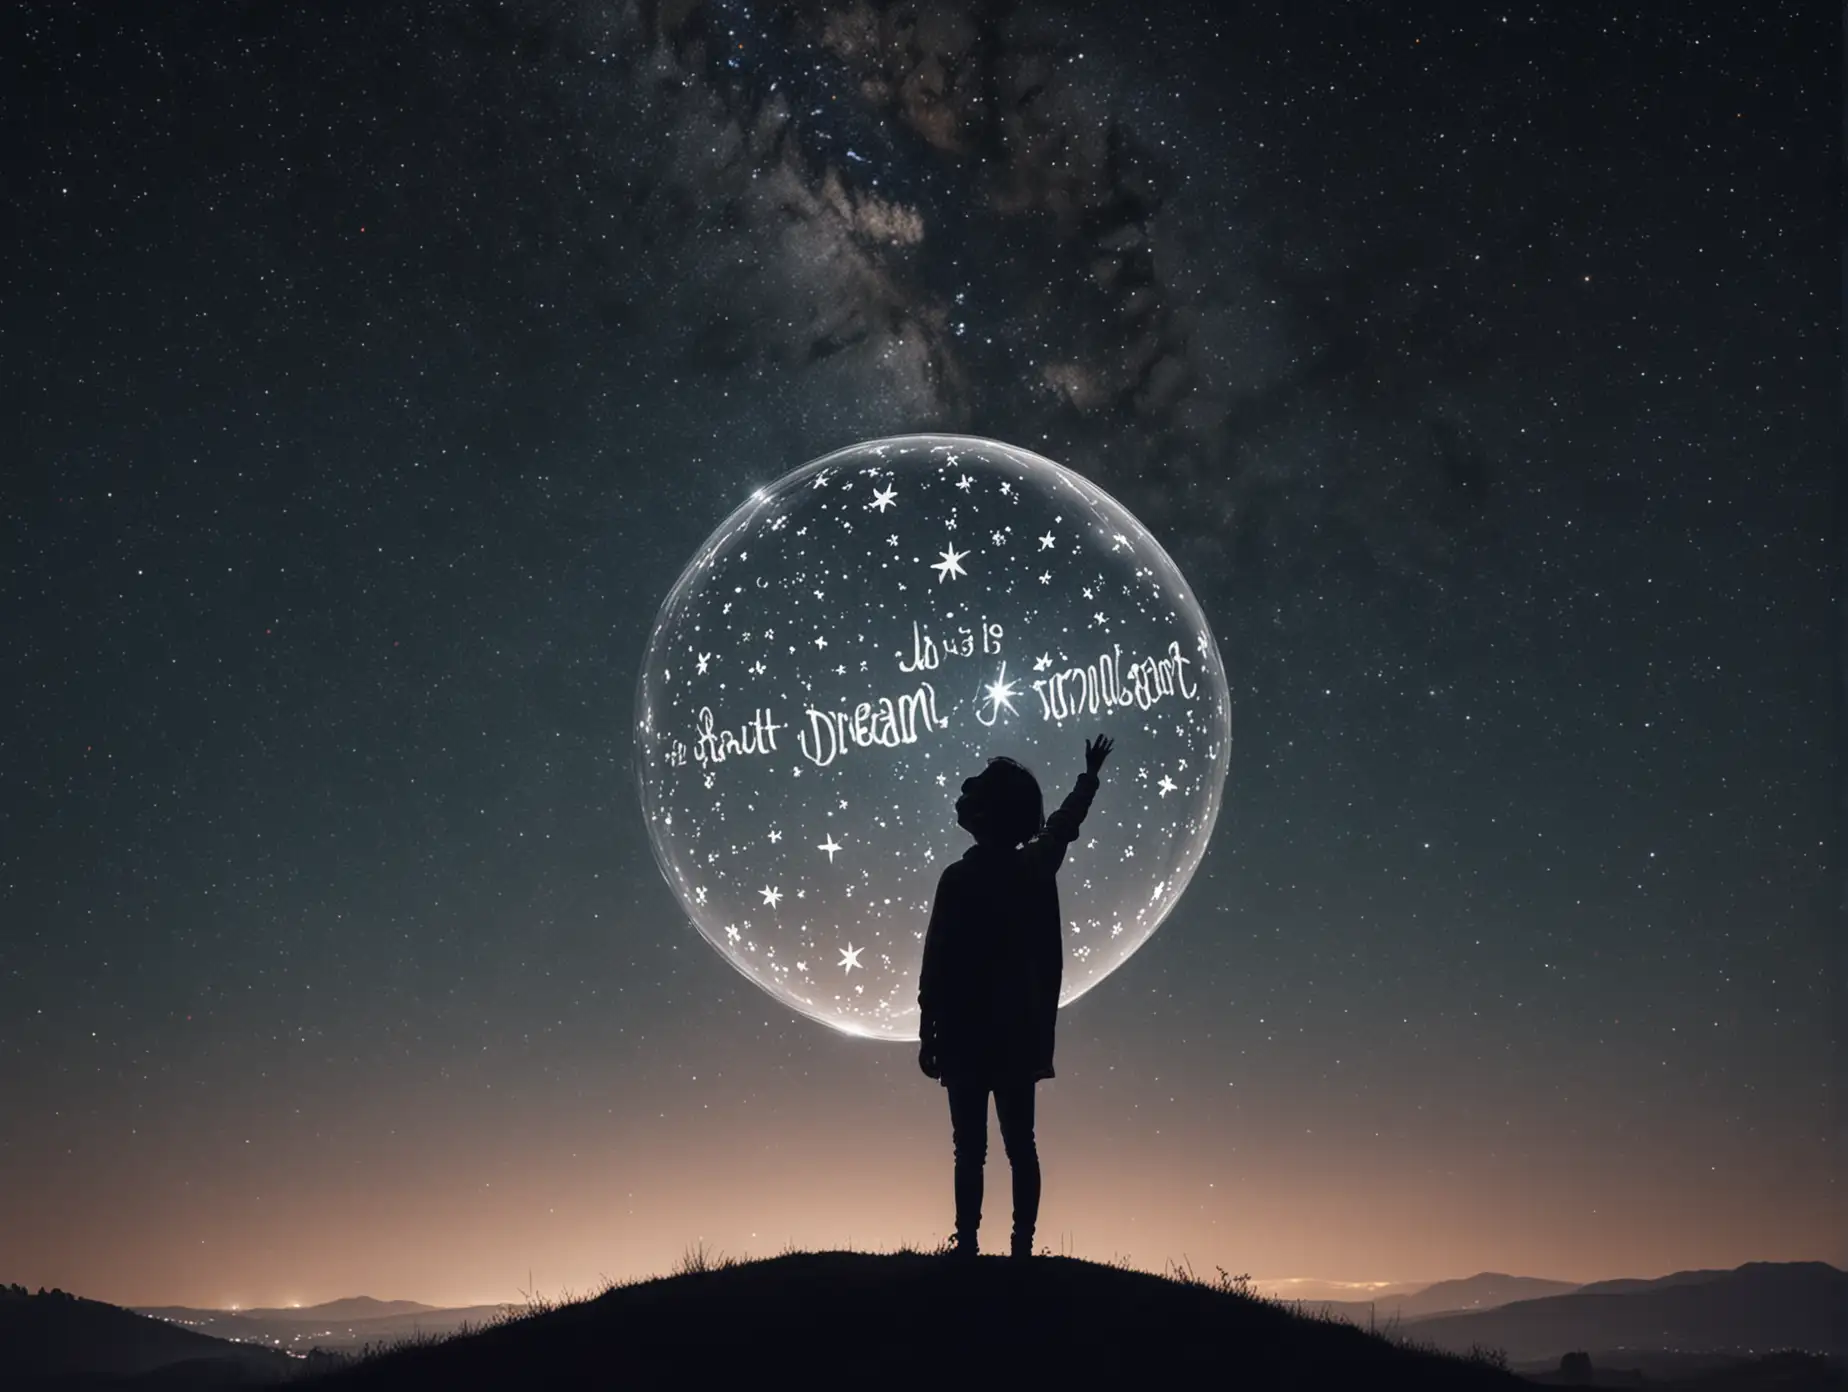 A silhouette of a person standing on a hilltop, looking up at the starry sky. The person's head is replaced by a big dream bubble with the words "What is your dream?" inside.
